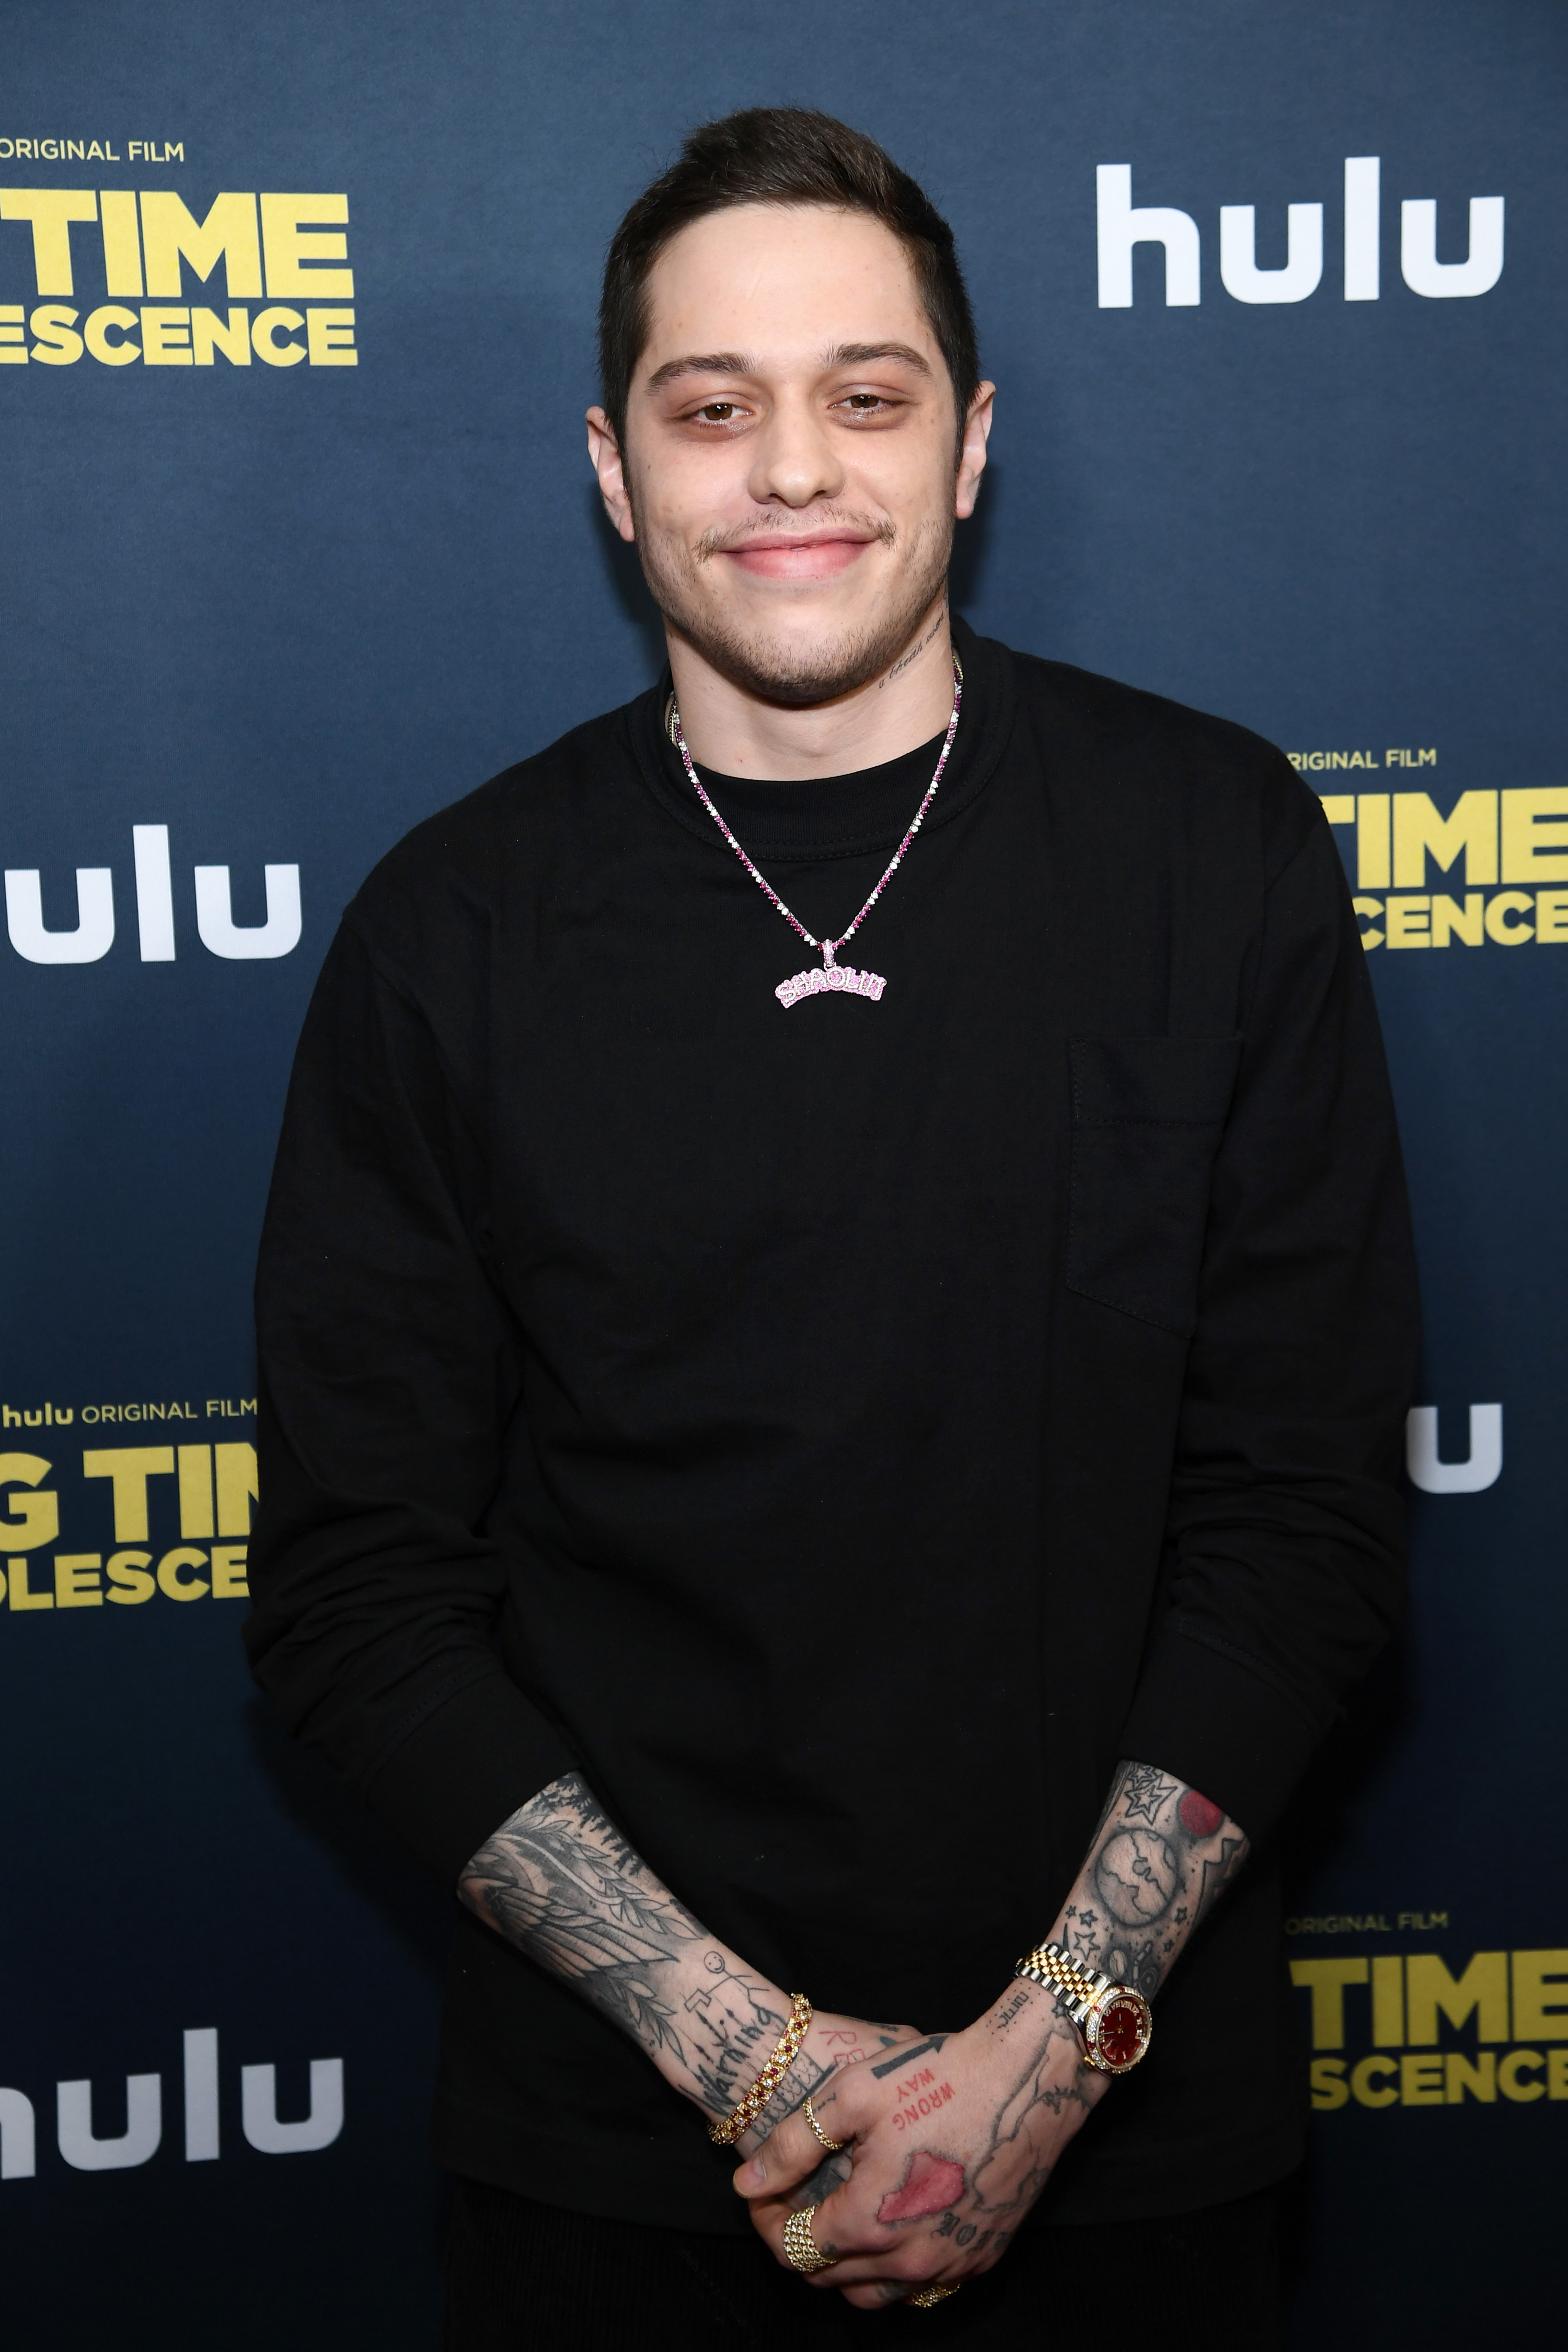 Photo of Pete Davidson at the premiere for &quot;Big Time Adolescence.&quot; He&#x27;s smiling at the camera and wearing a black sweater and a necklace that spells out &quot;SHAOLIN.&quot; The tattoos on his forearms and hands are visible.